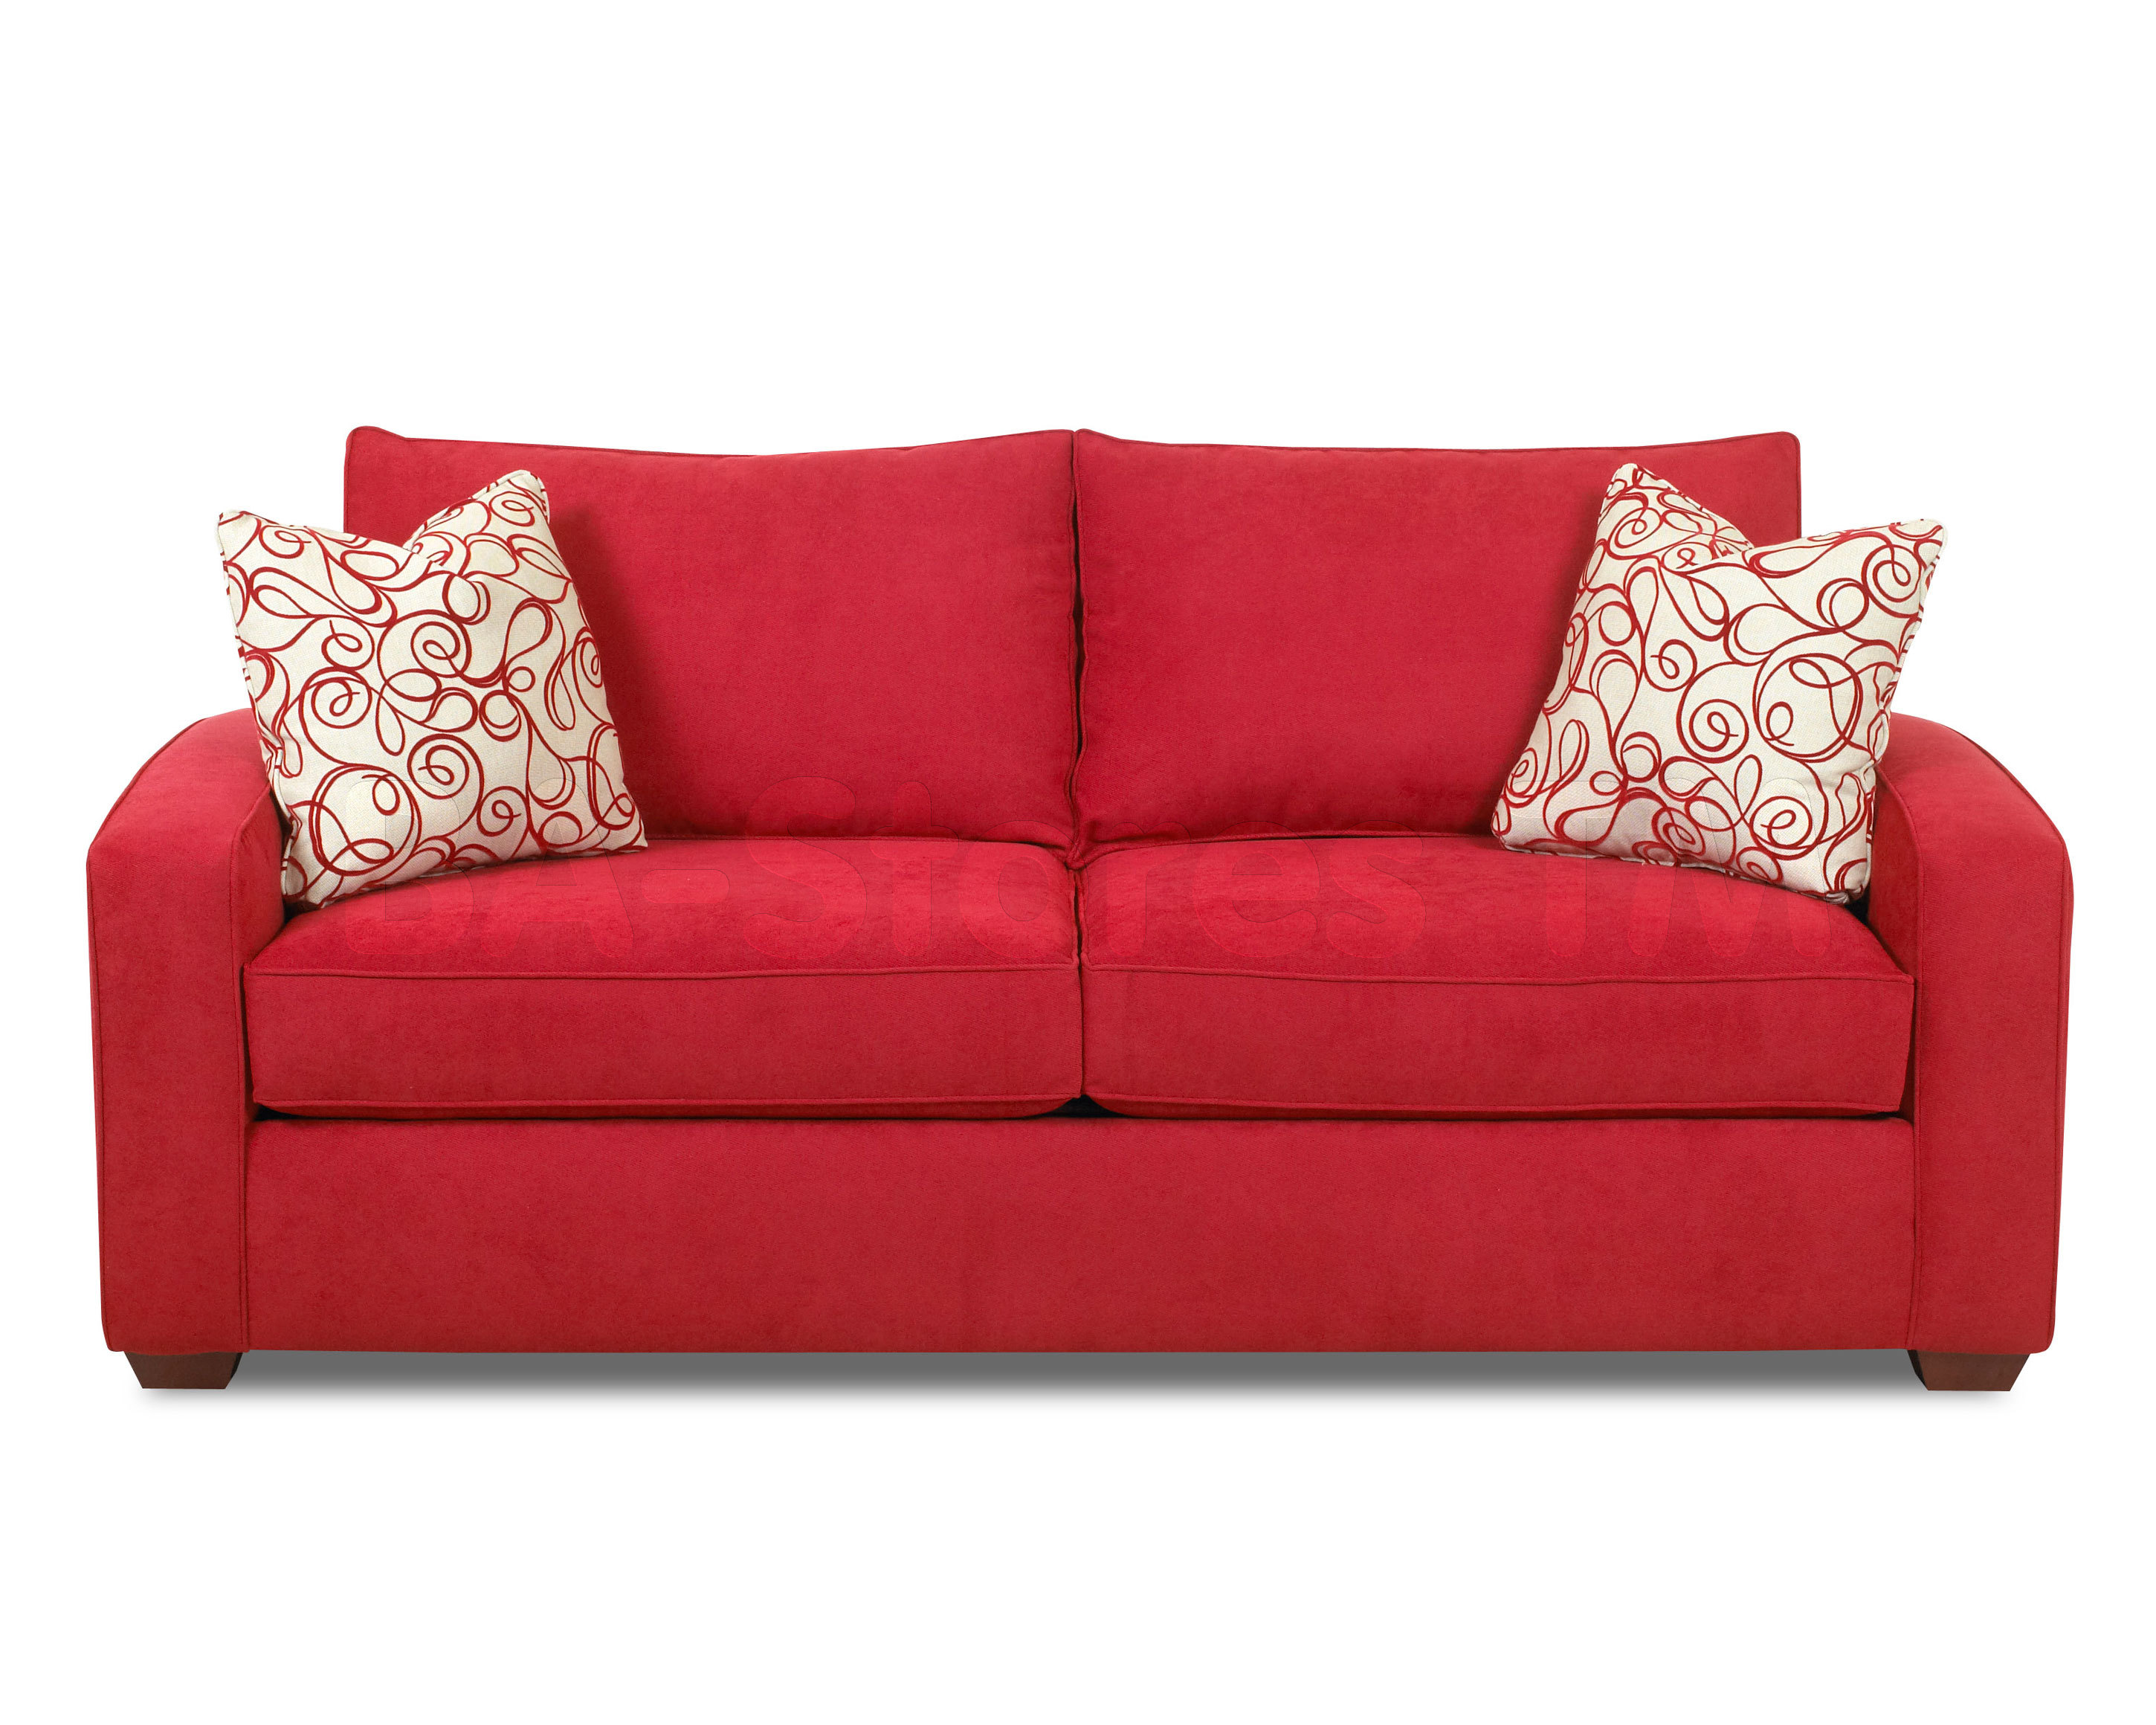 sofa sets clearance - Sofa Sets and What to Consider When Choosing – 0 | Magazine ...